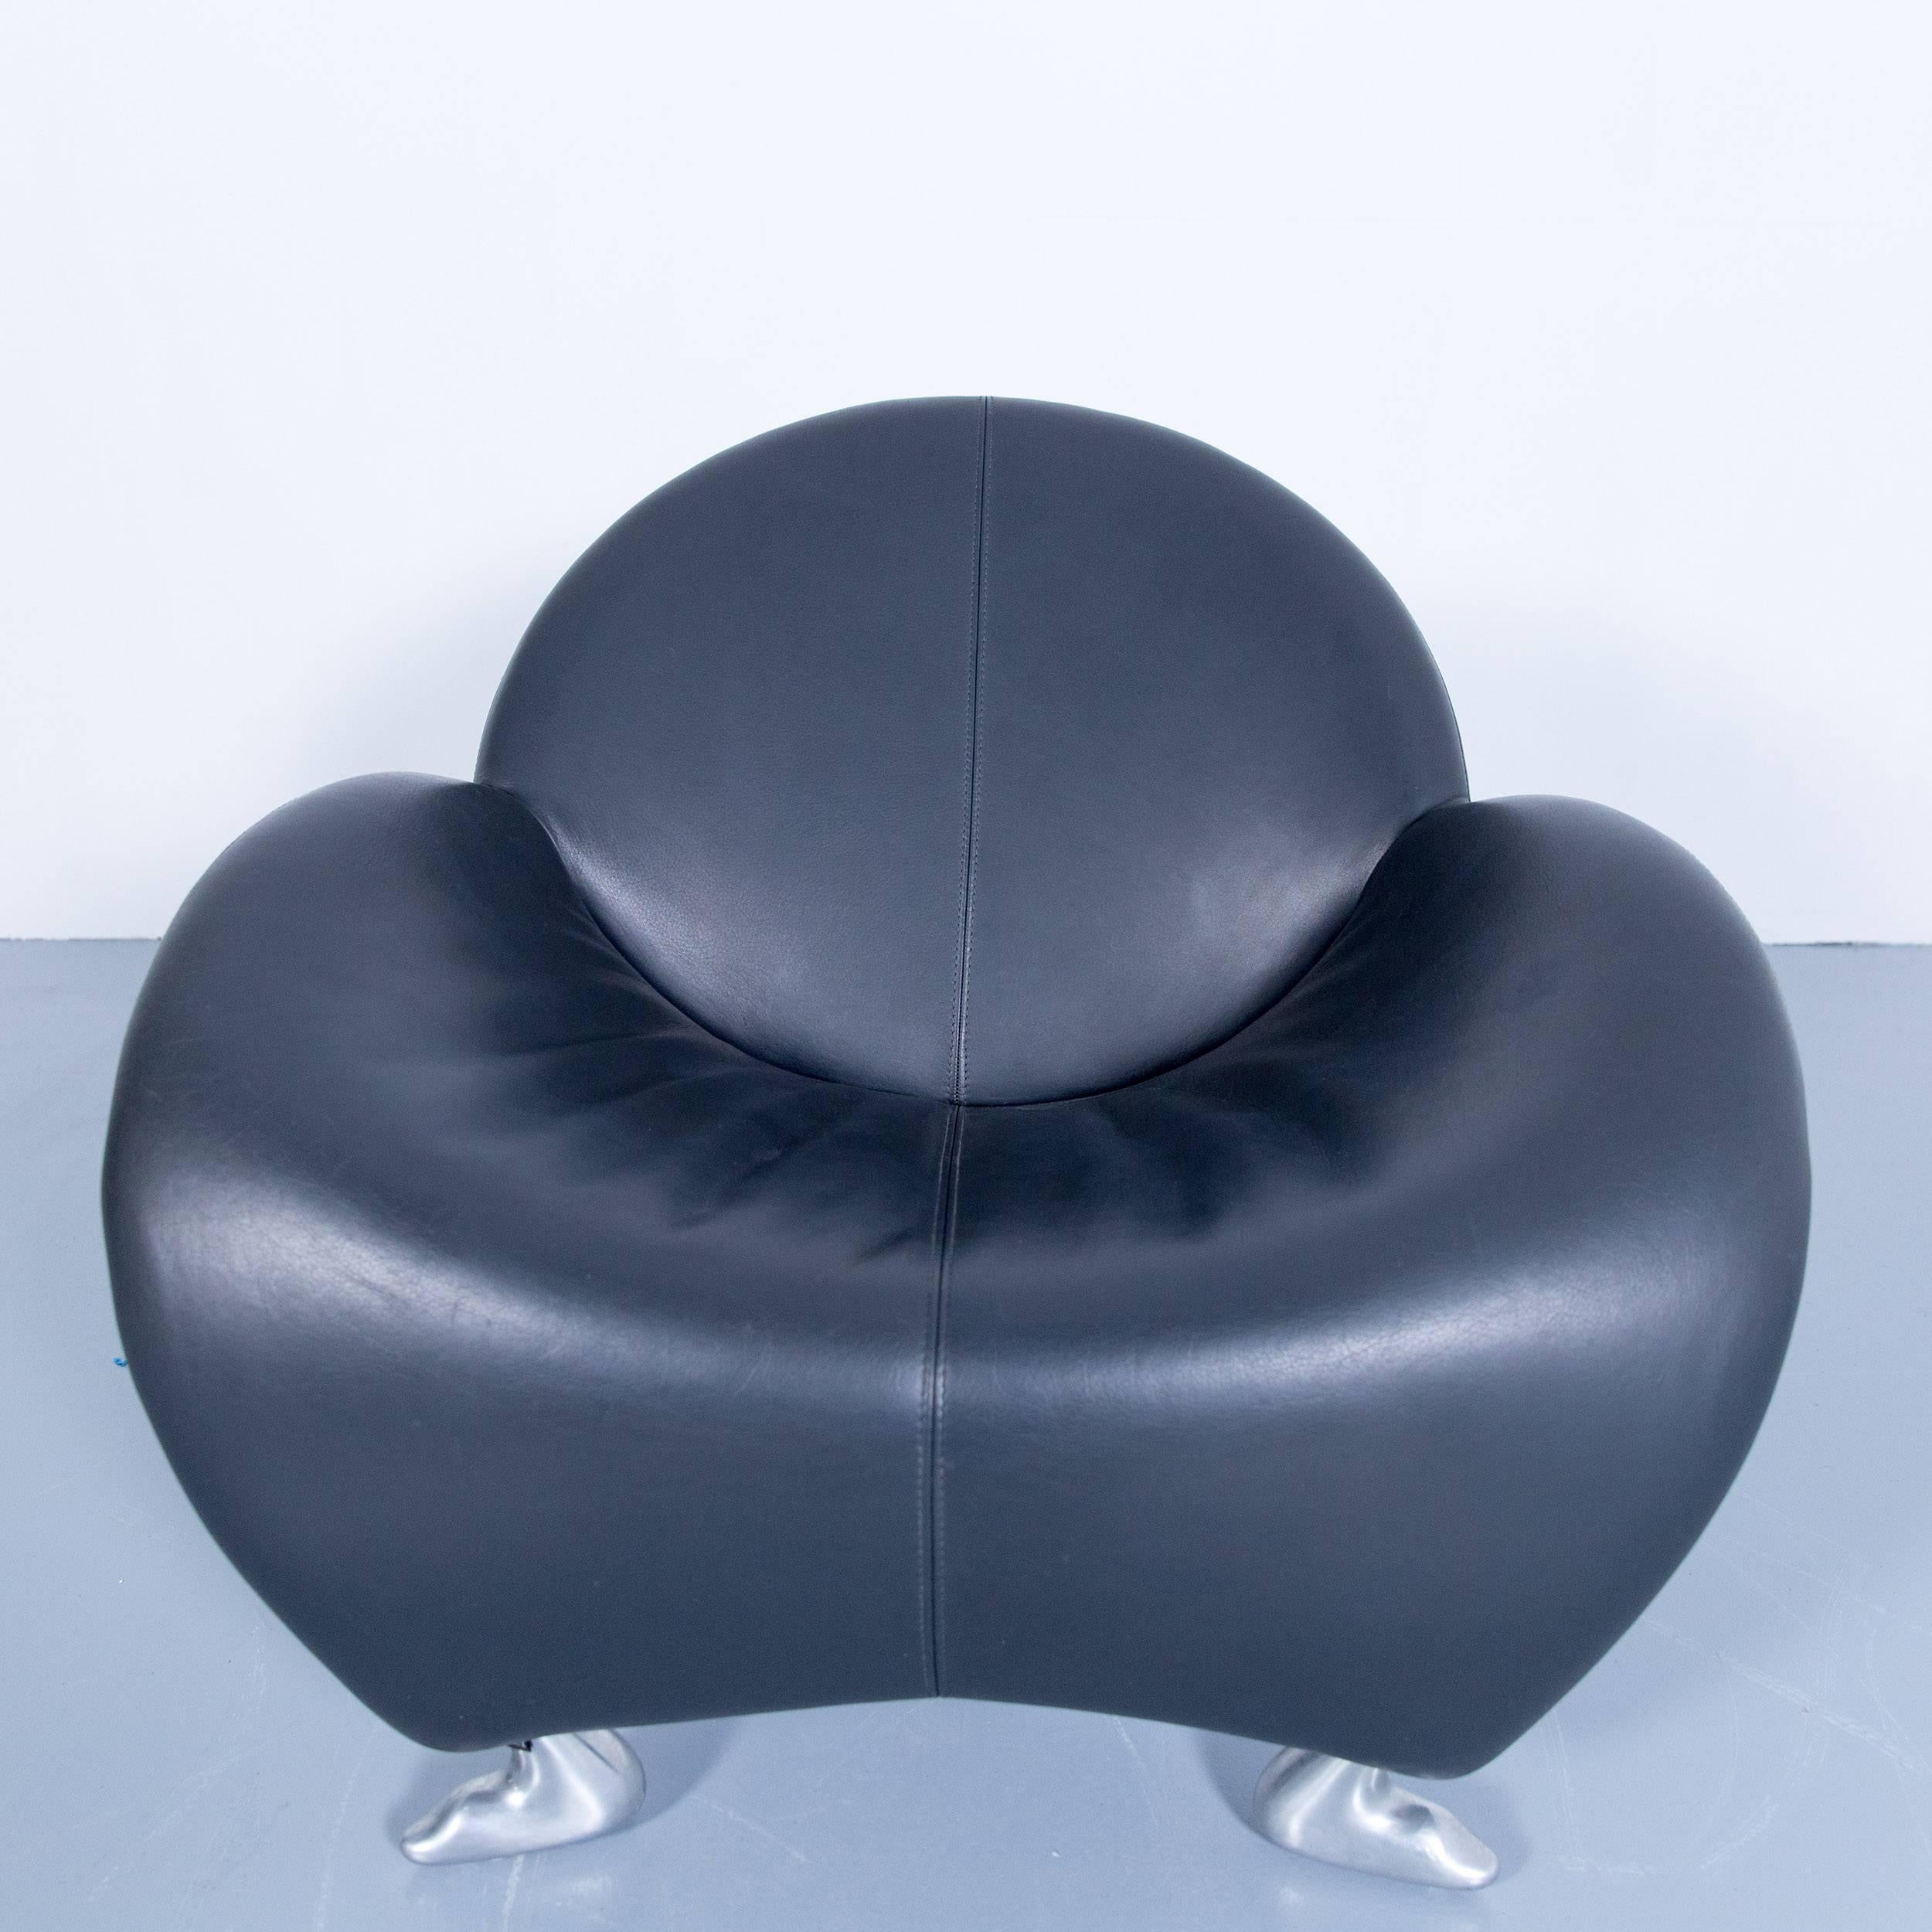 Contemporary Leolux Papageno Designer Chair Grey Anthracite Black One-Seat Couch Modern